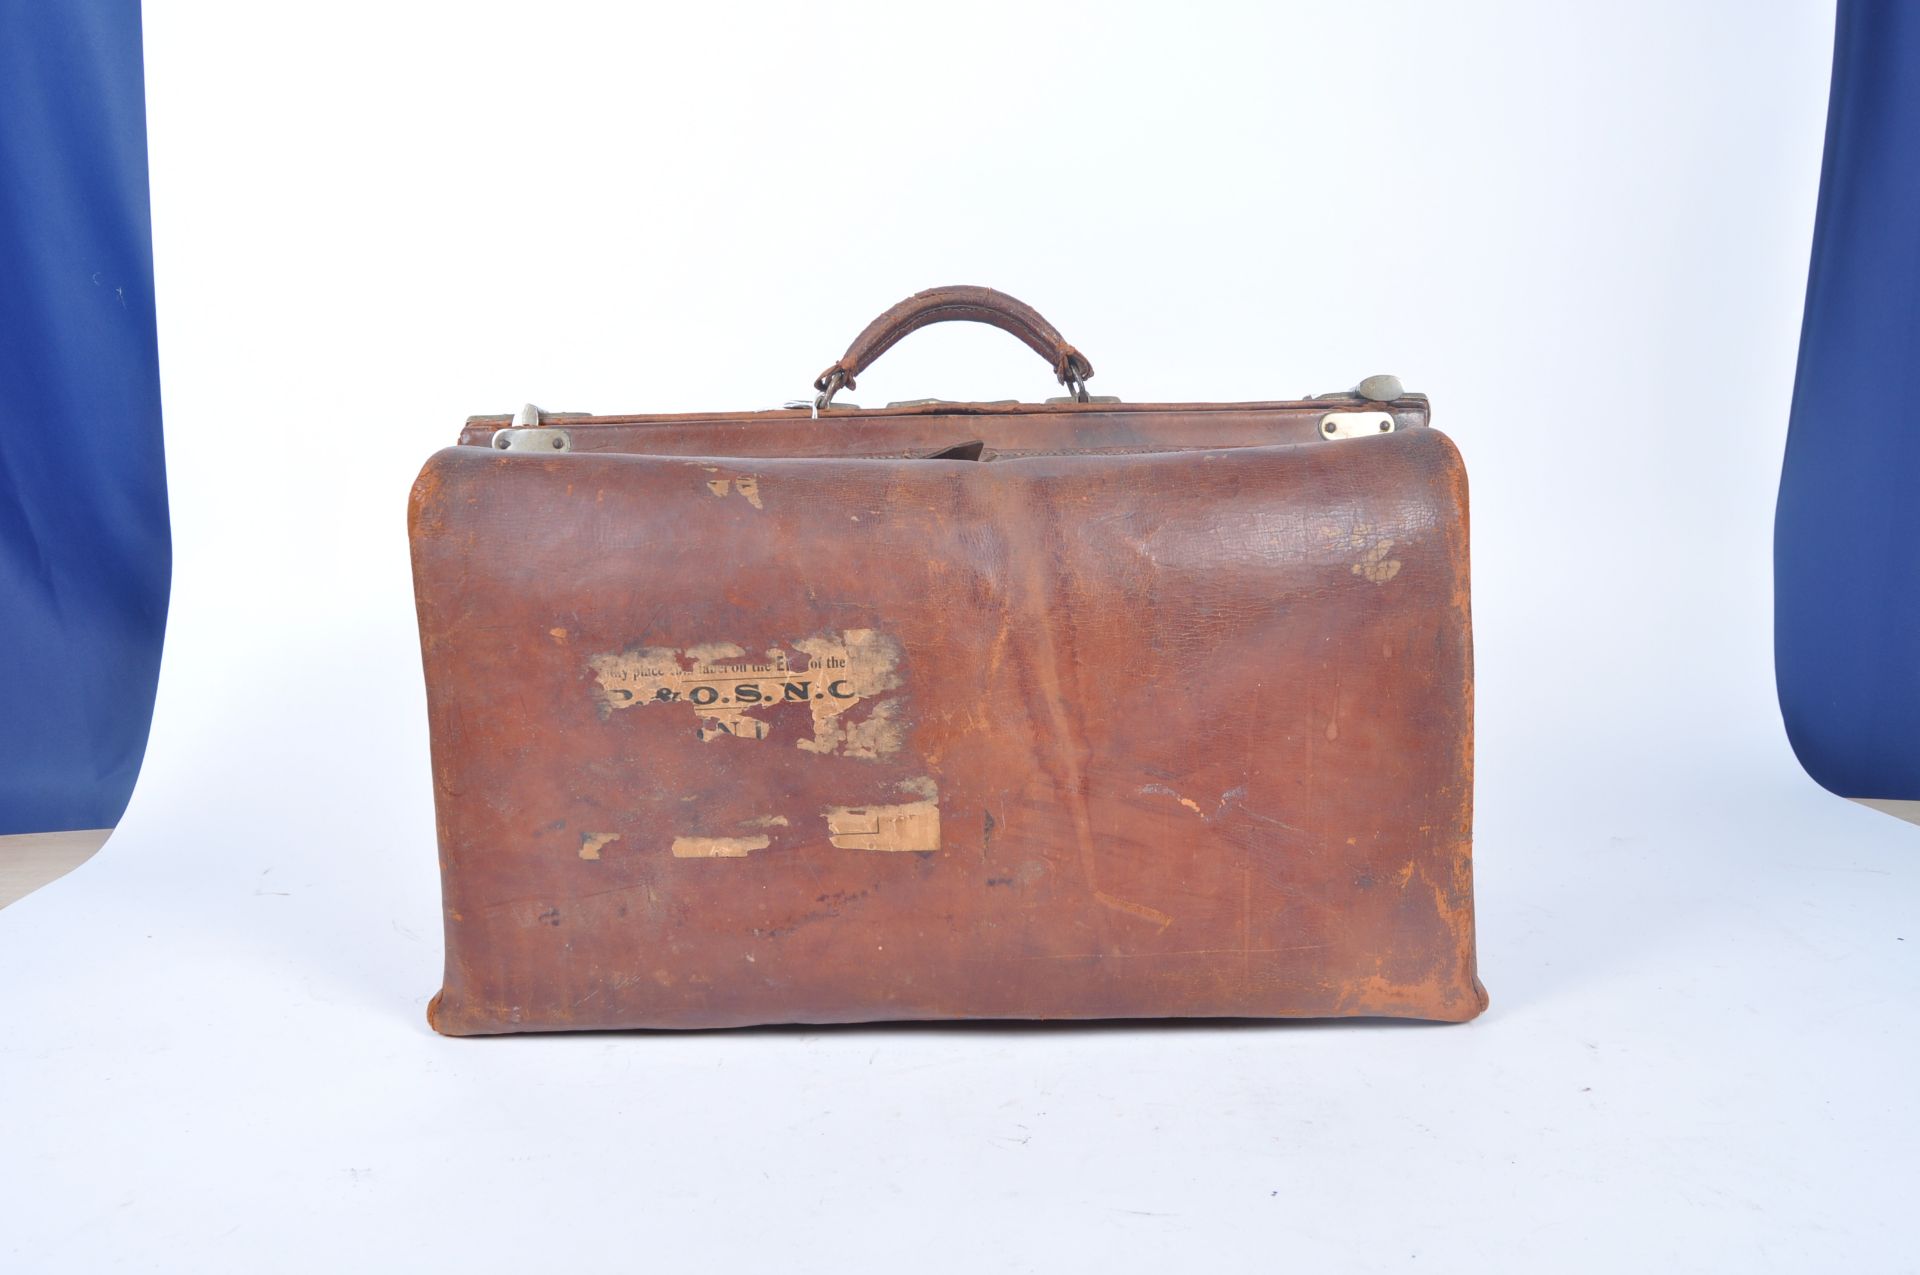 VINTAGE EARLY 20th CENTURY LEATHER CABIN BAG - Image 6 of 8